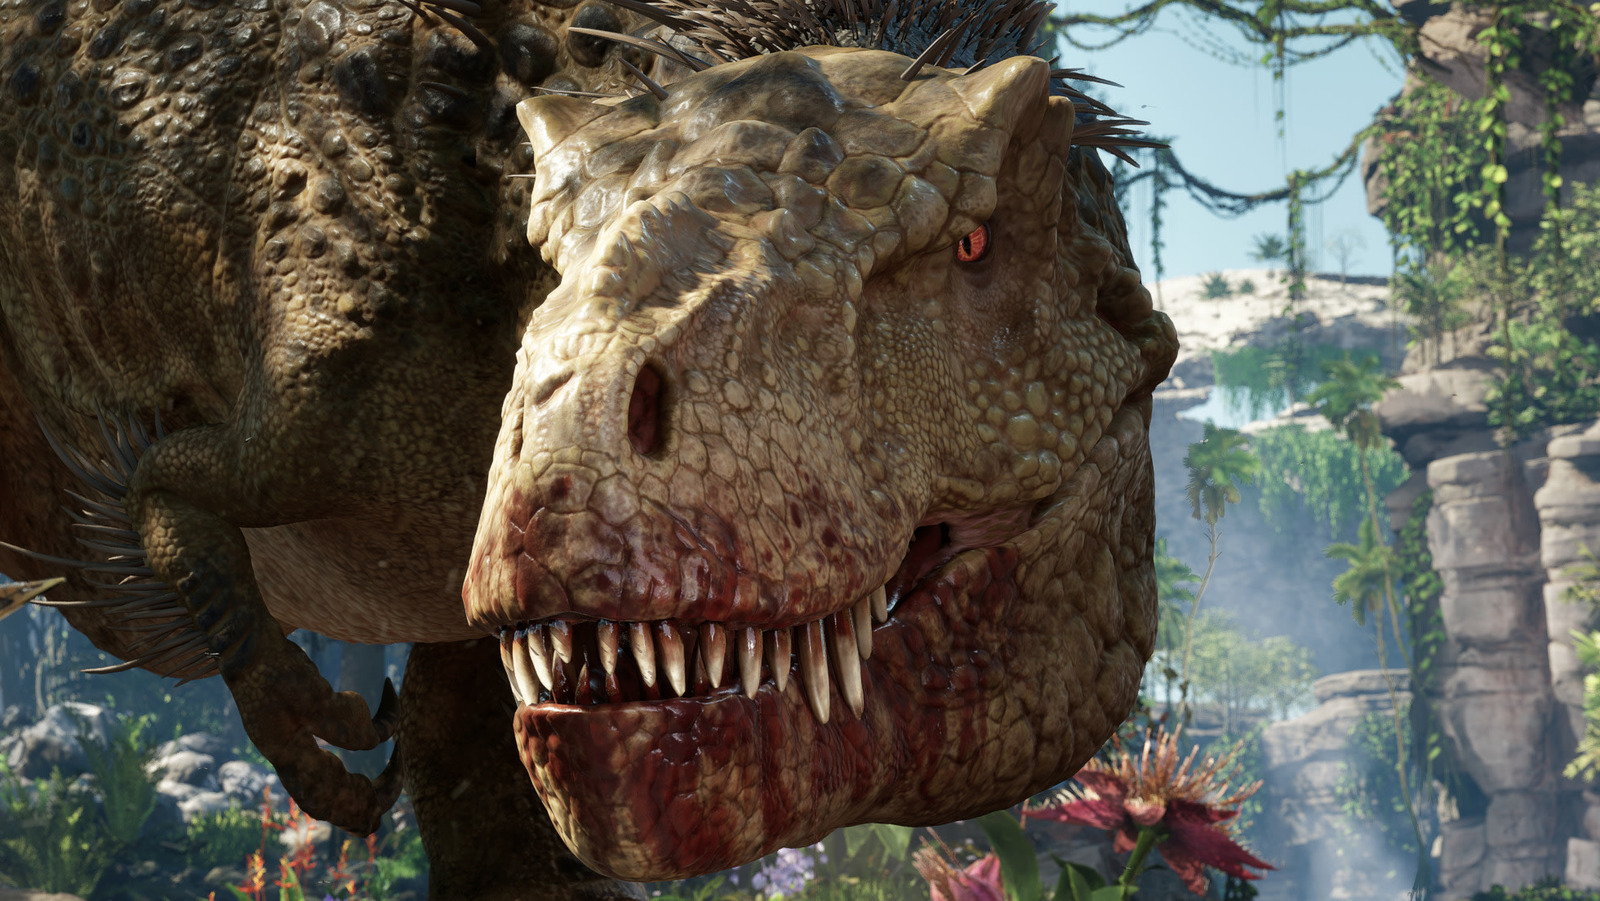 ARK 2 DINOSAUR COMPARISON - Ark 1 & 2 Dinosaurs Compared To Each Other 